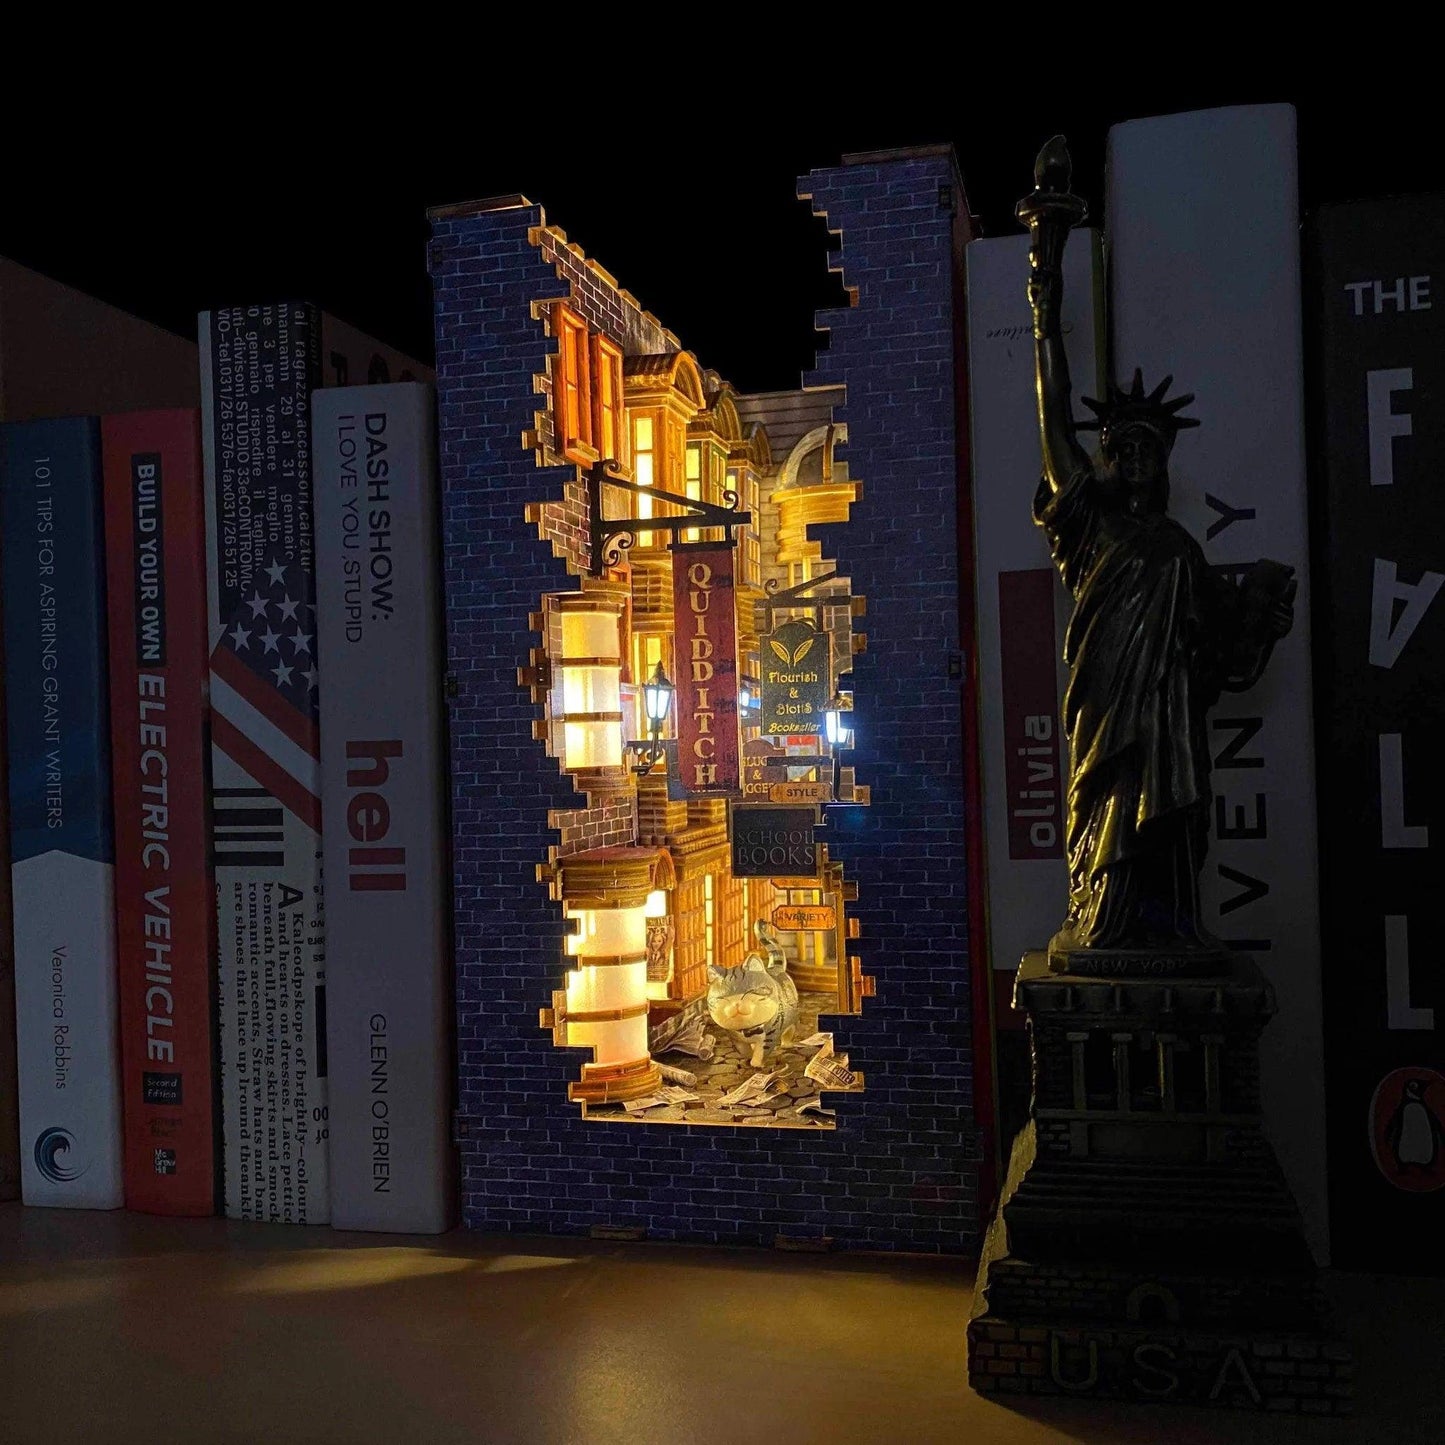 DIY Magic Alley Book Nook - DIY Book Nook Kits - Wizard Alley Book Nook Dioramas Book Shelf Insert Book Scenery with LED Model Building Kit